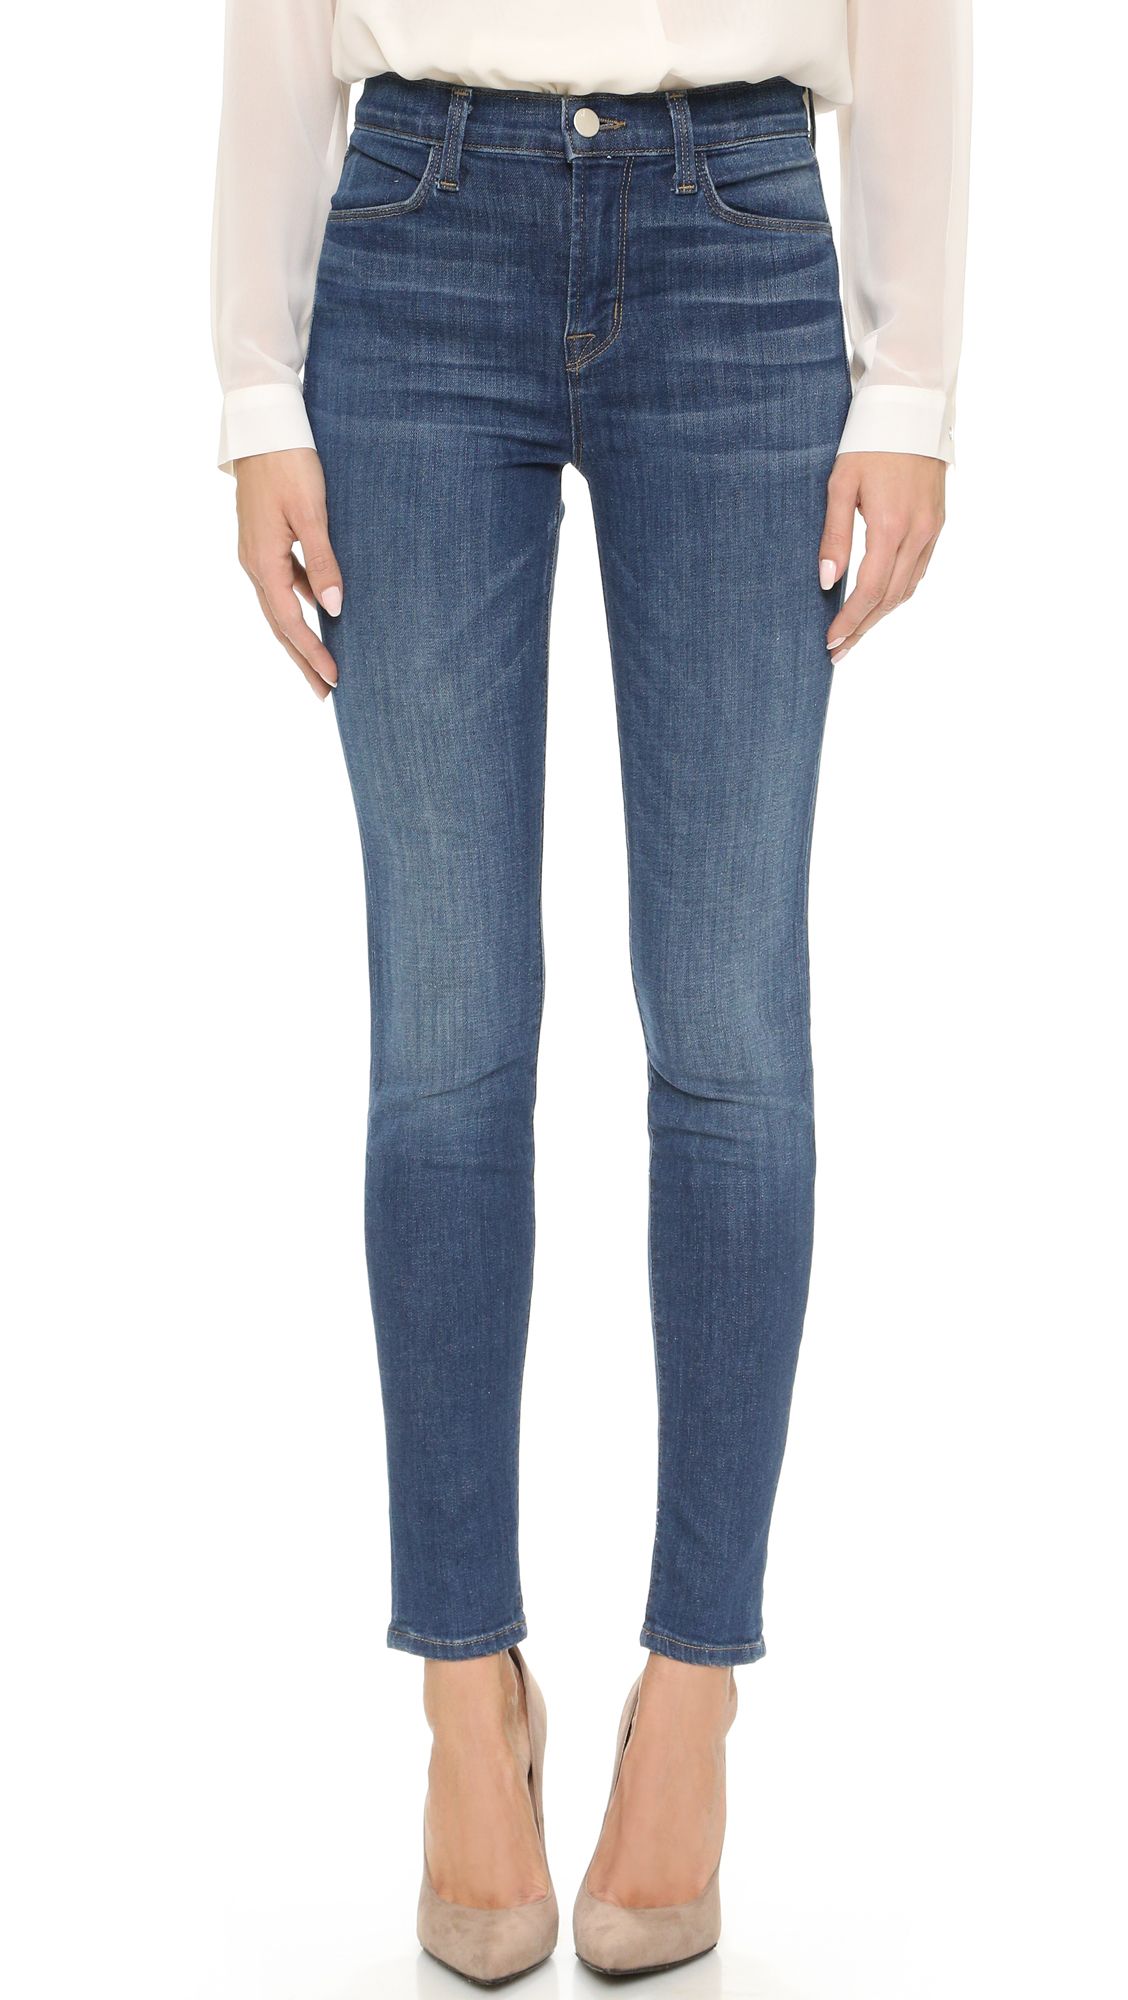 J Brand Maria High Rise Skinny Jeans - Activate | Shopbop